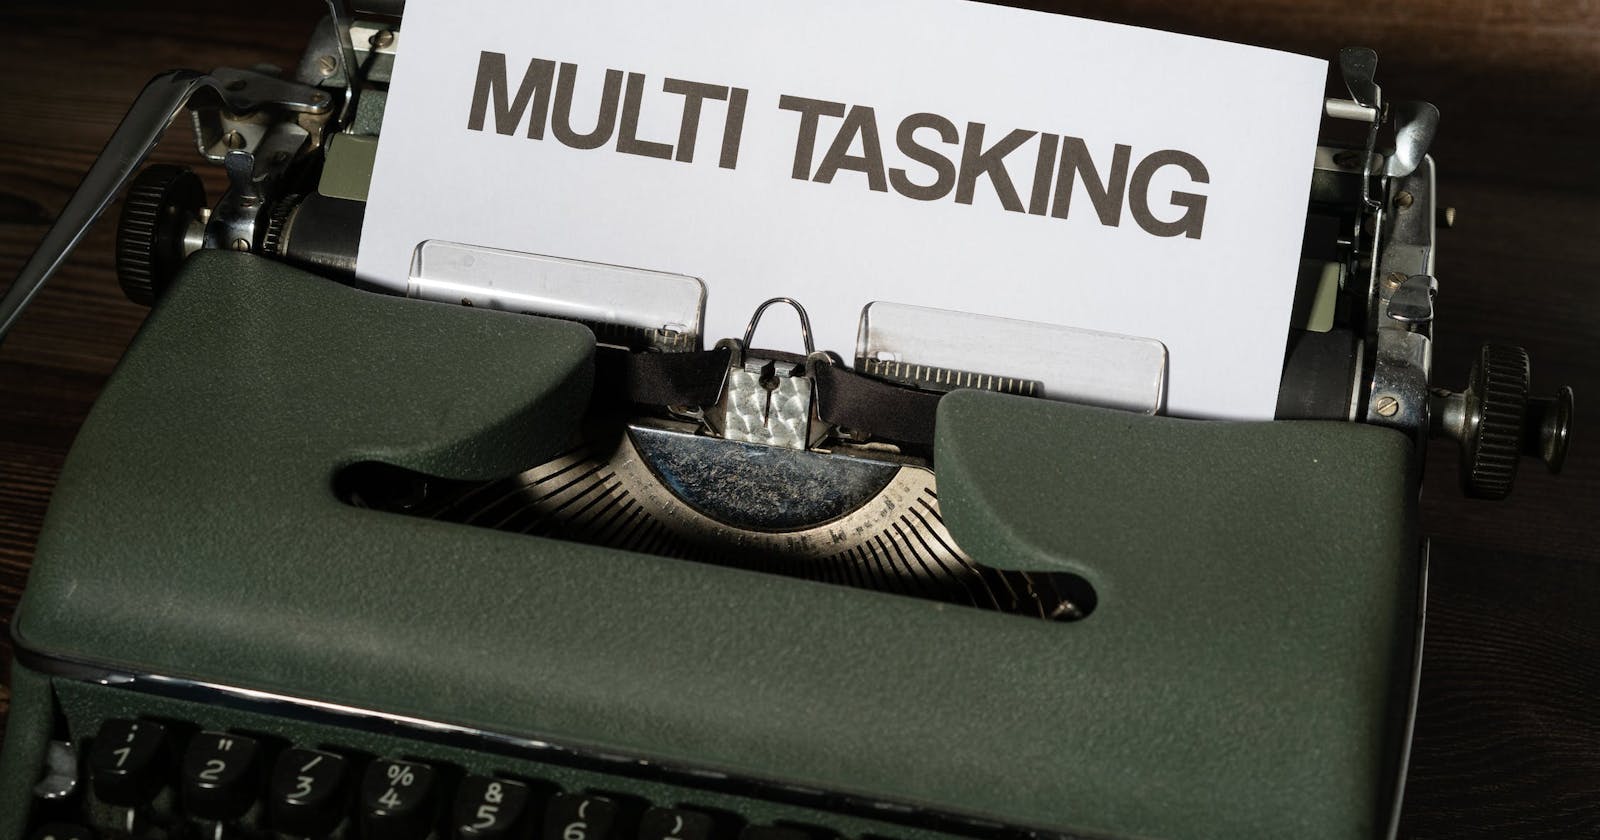 Multi-tasking is a myth to the untrained mind